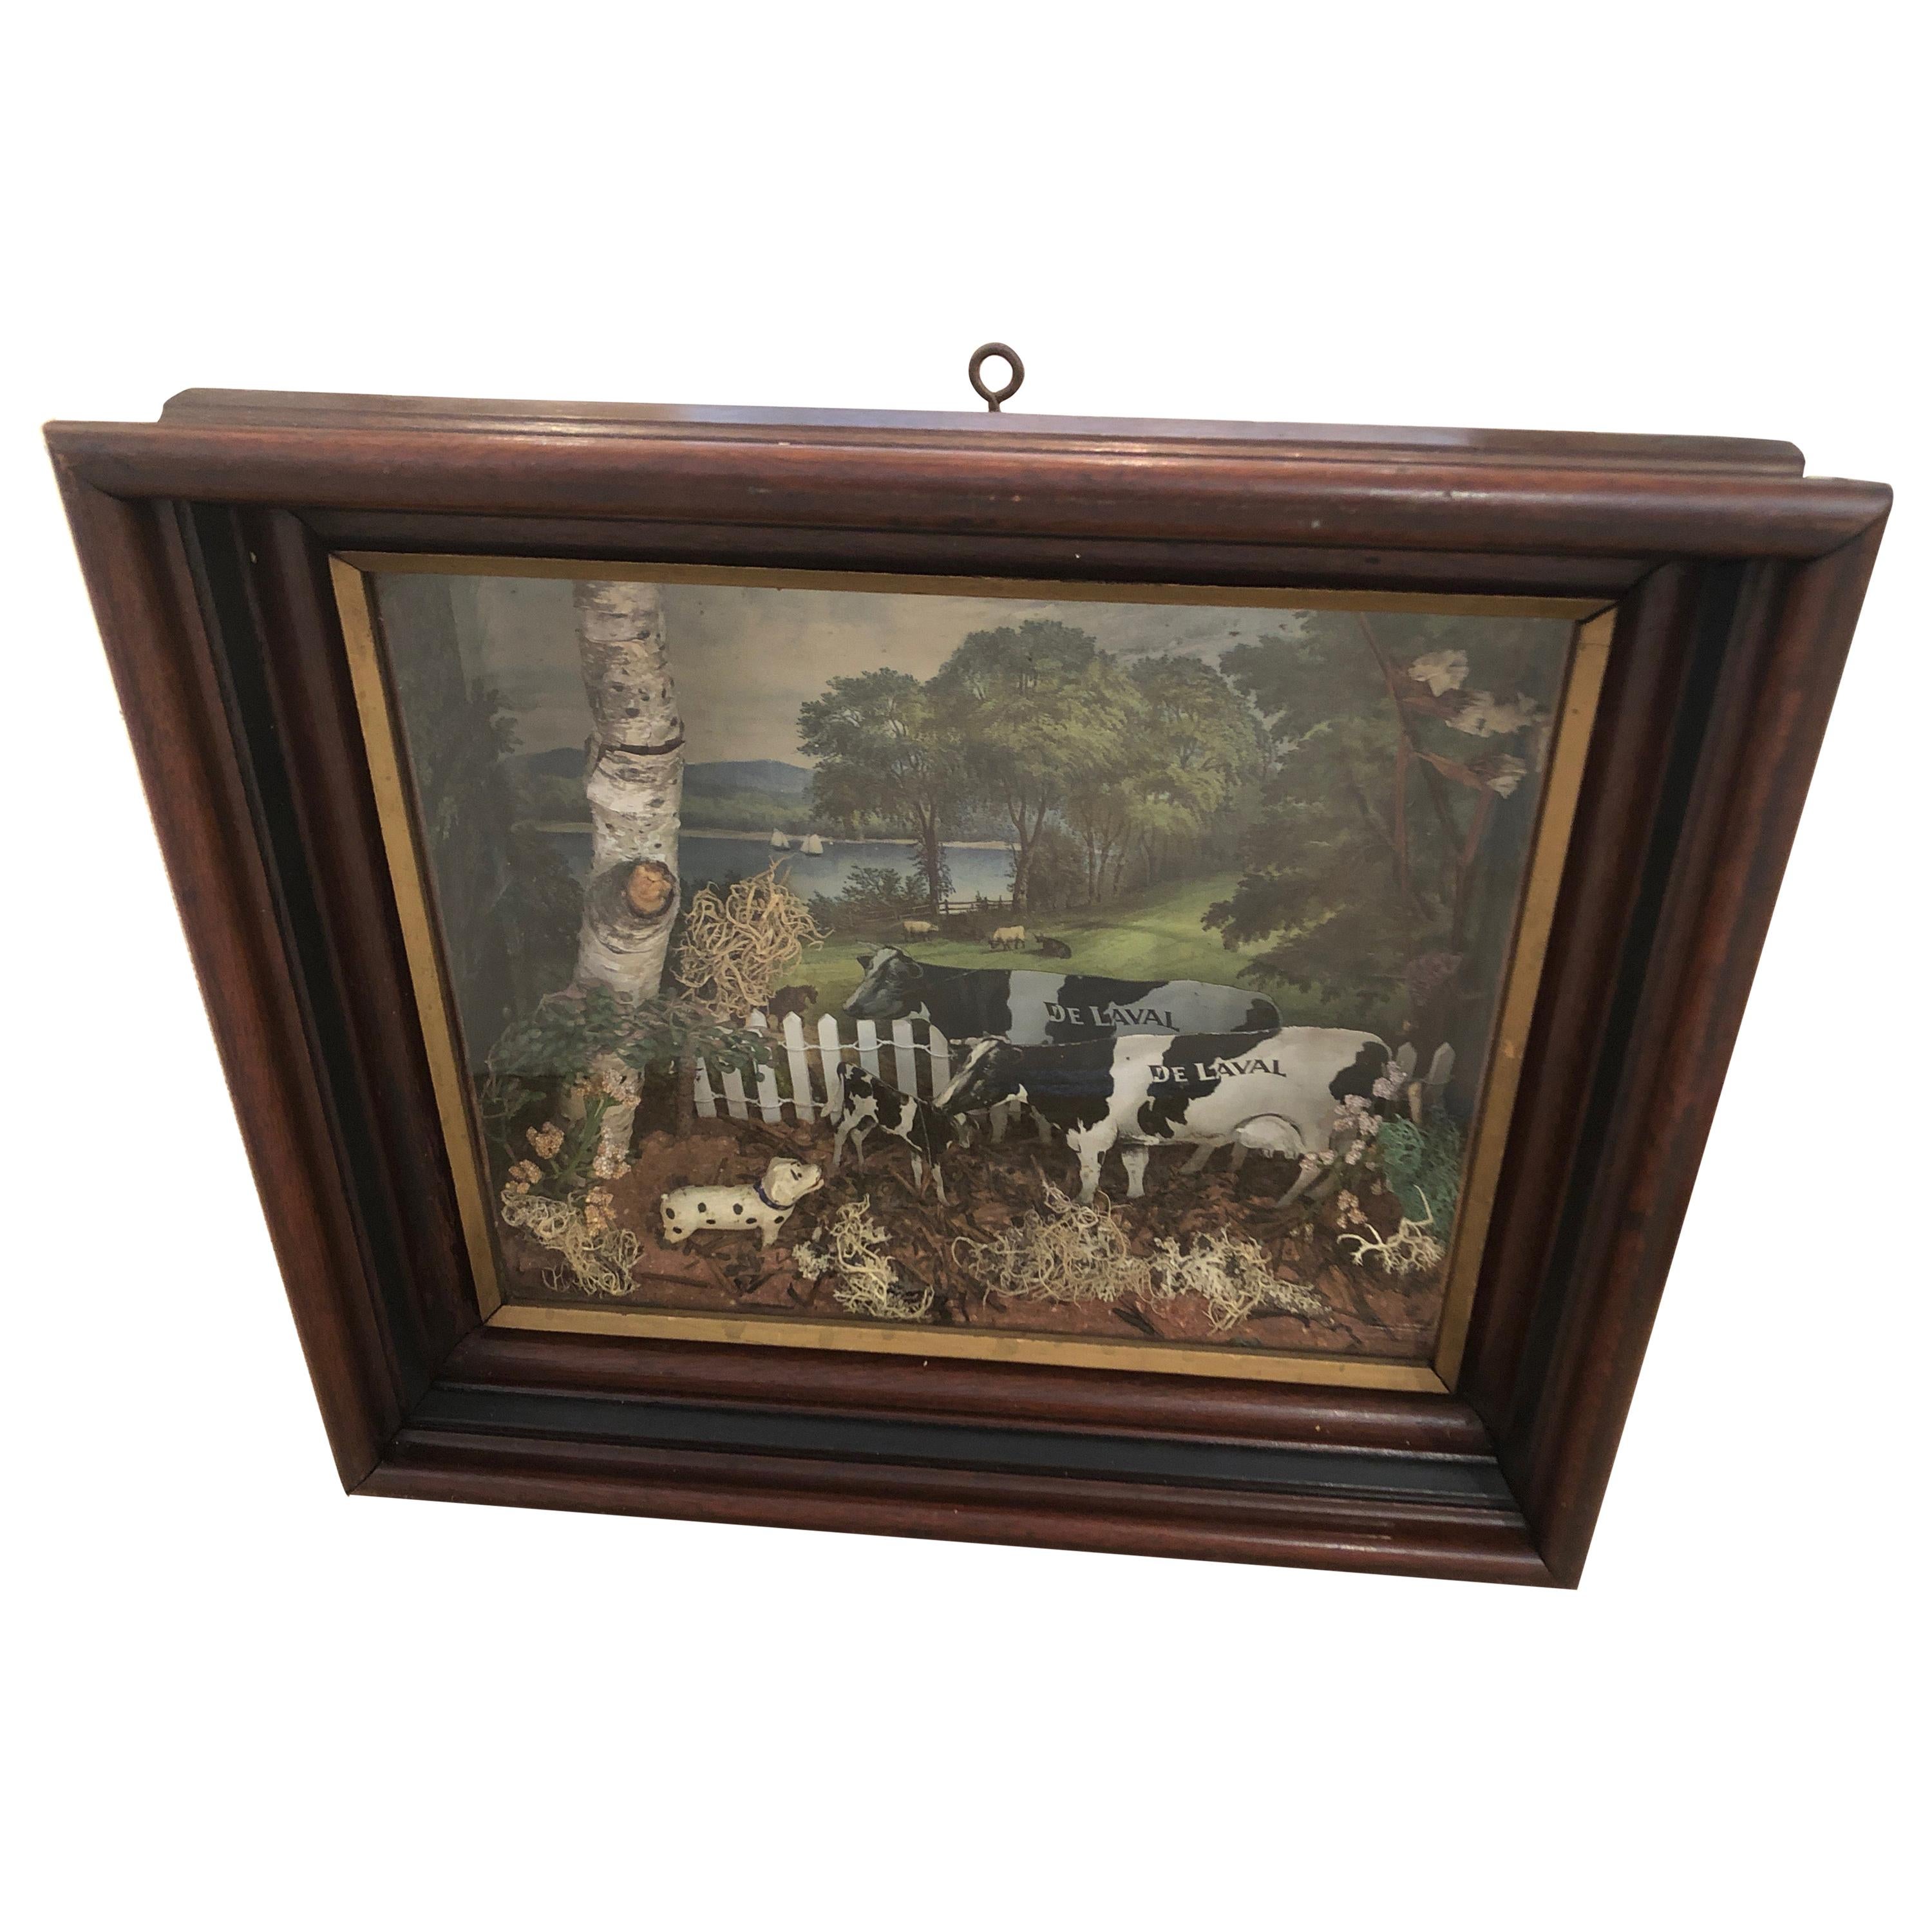 Charming Shadow Box Diorama of Pastural Scene with Cows